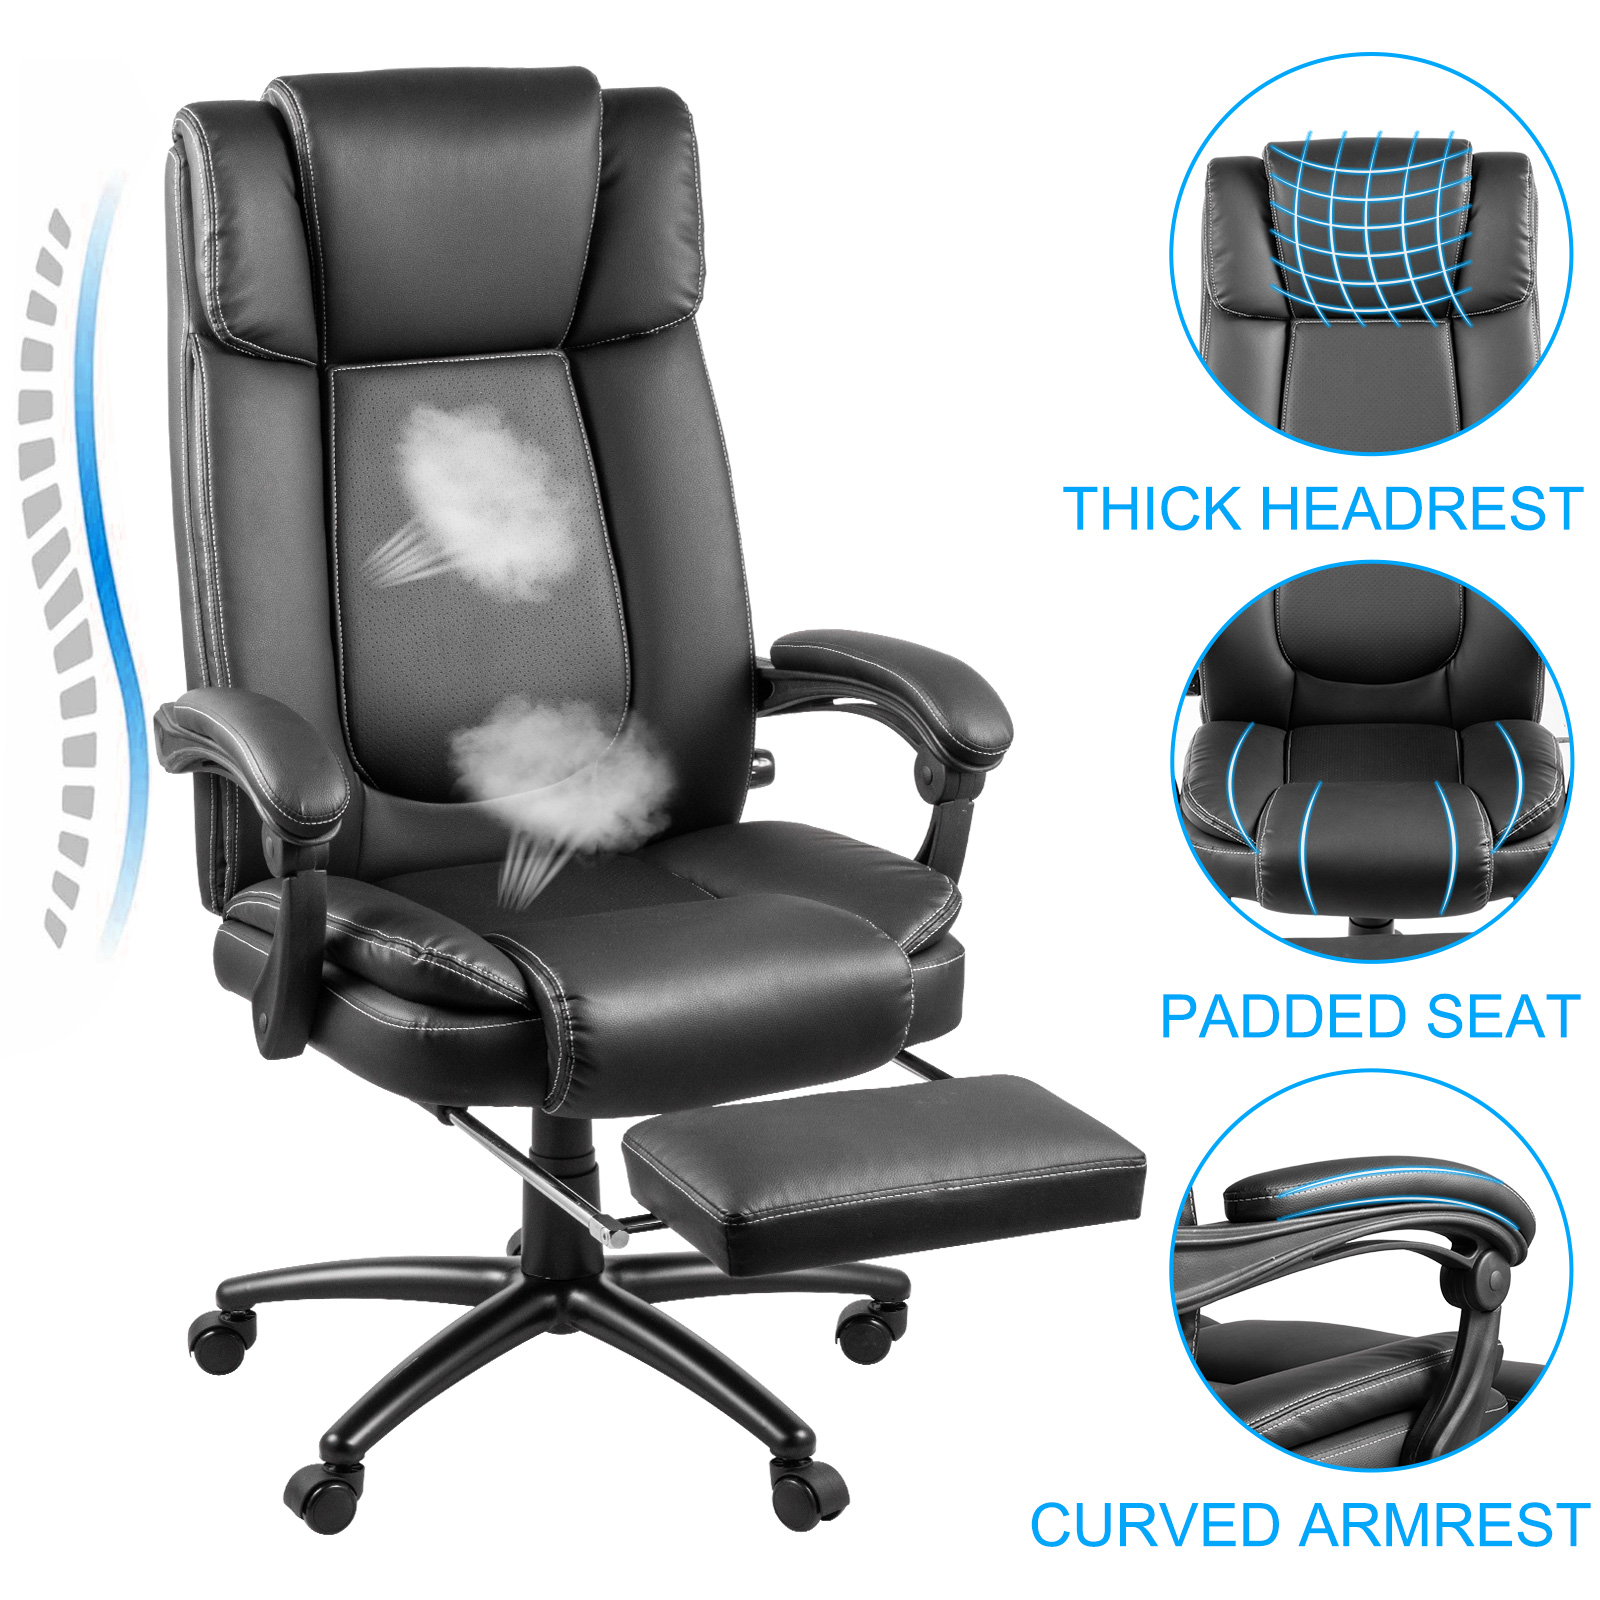 Details about   Executive Office Chair High-Back Task Ergonomic Computer Desk Study PU Leather 1 